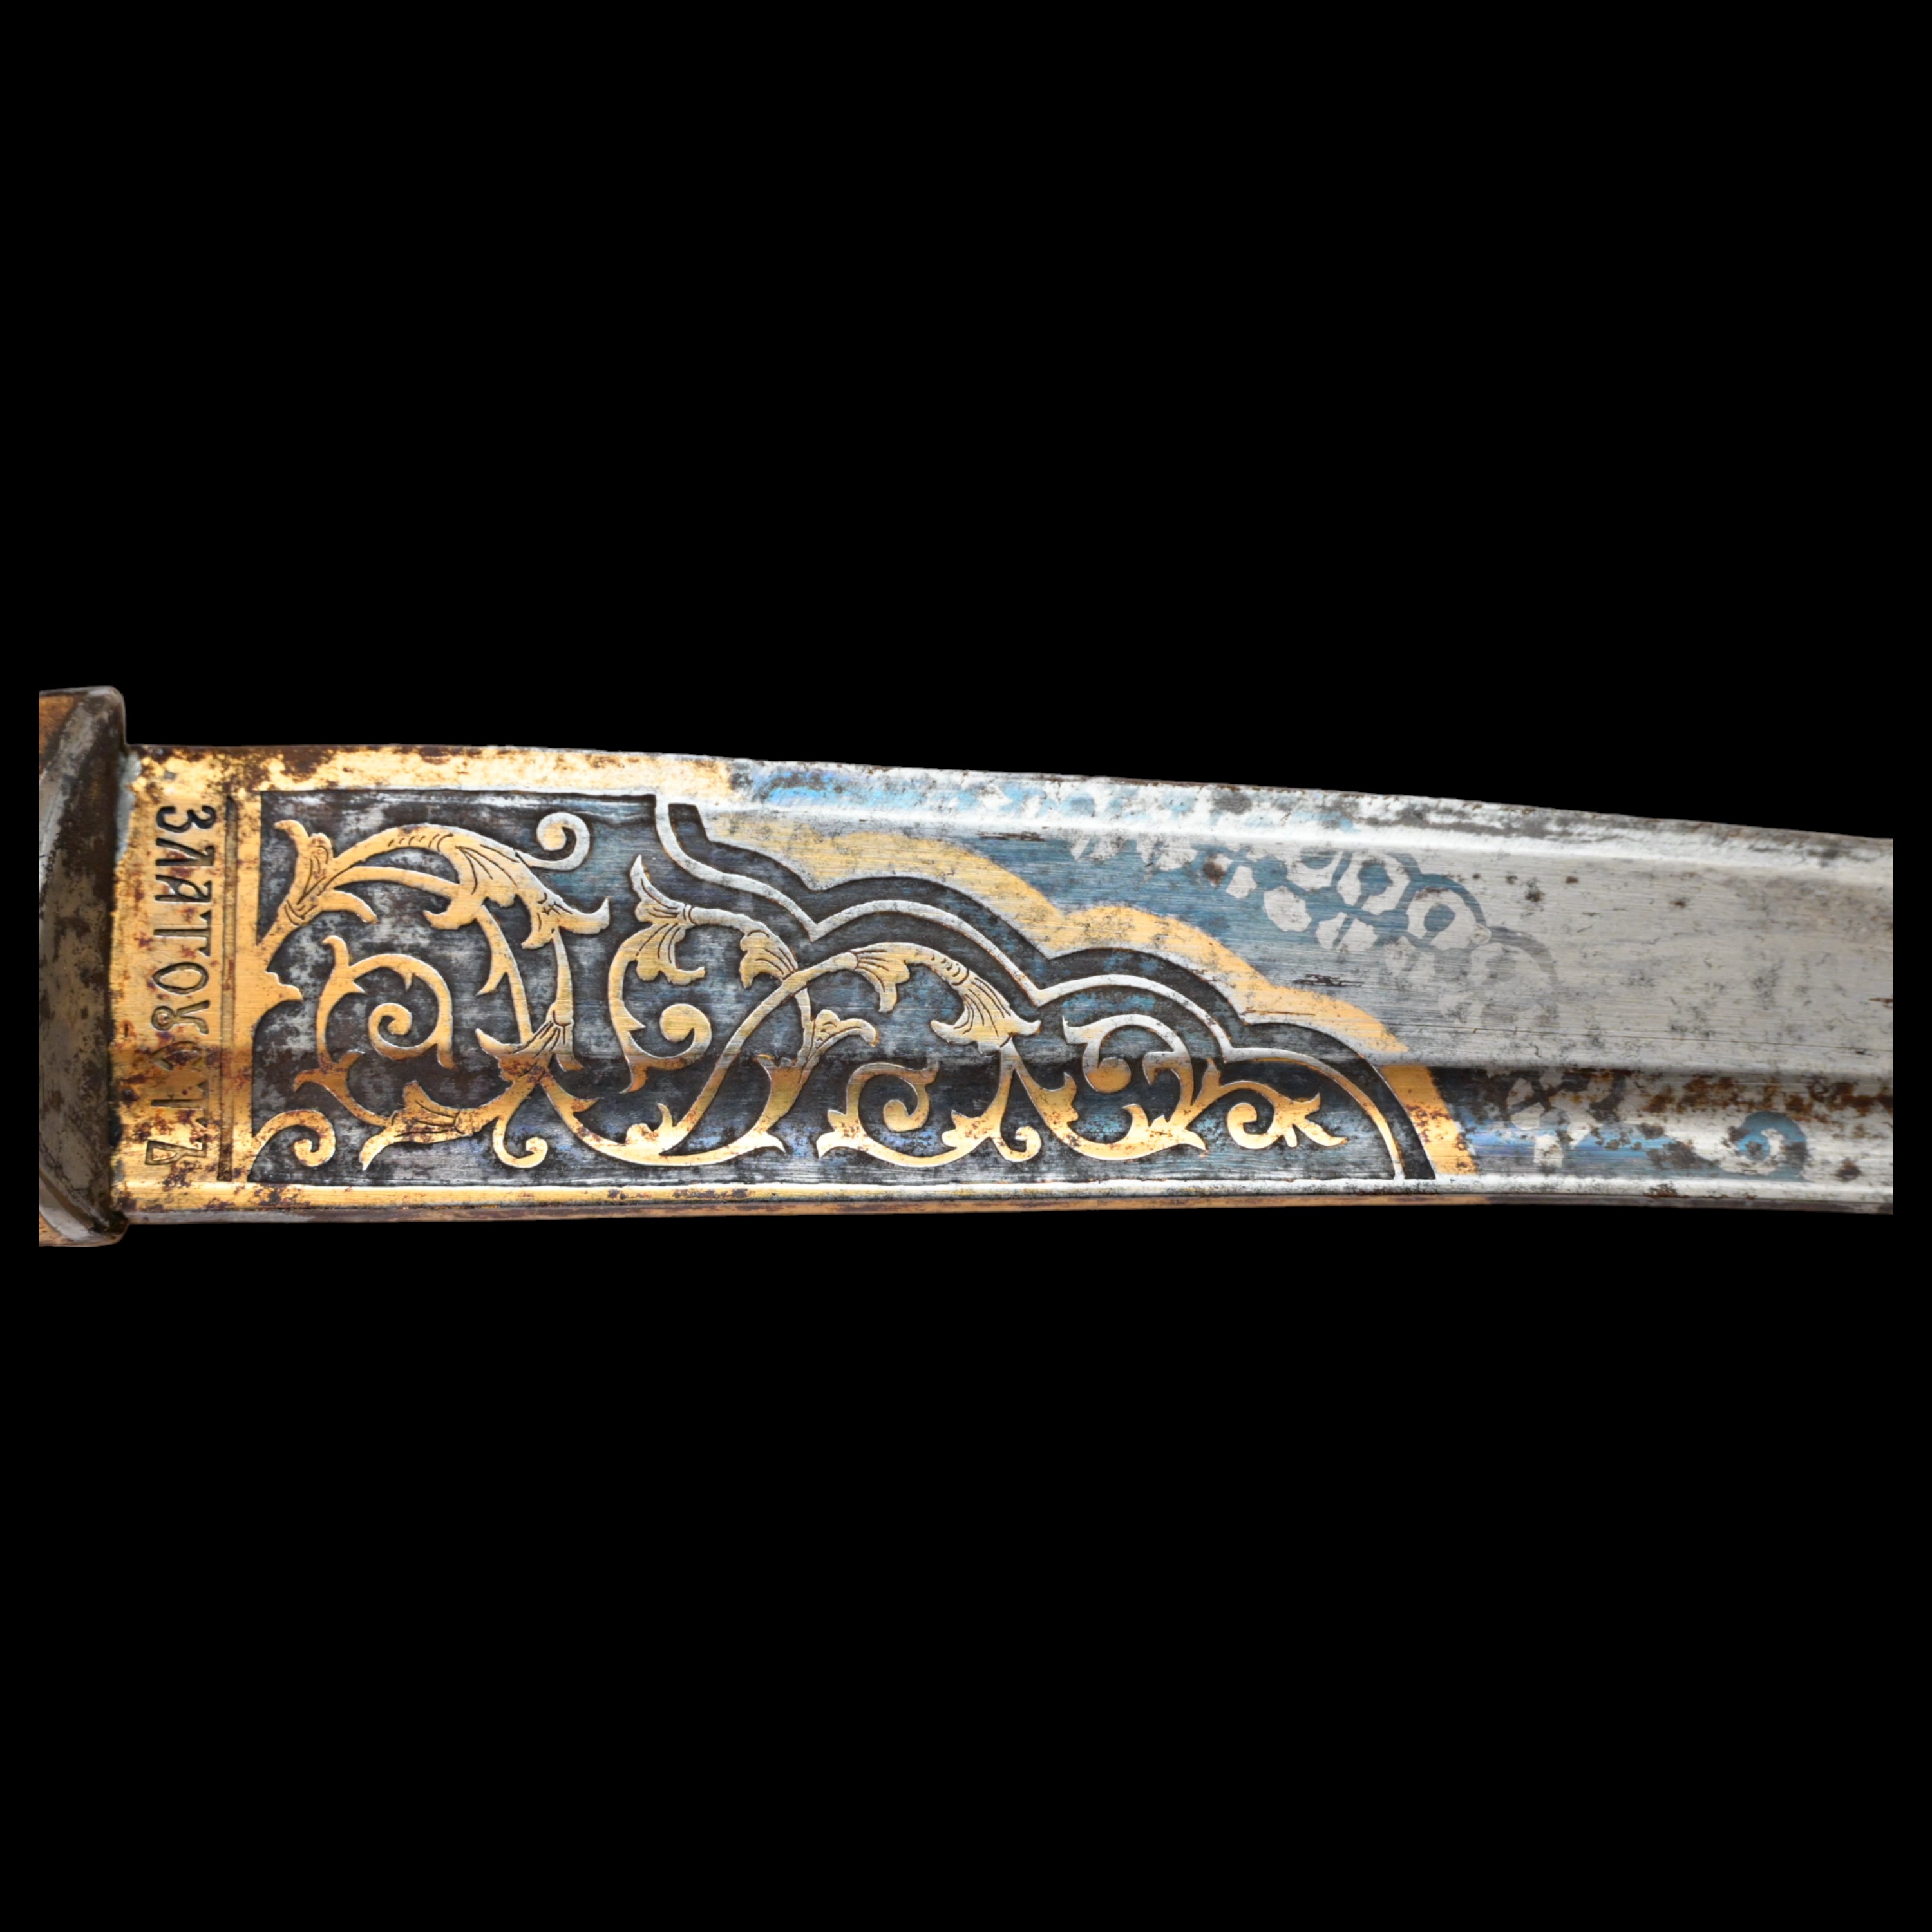 RARE HUNTING KNIFE, DECORATED WITH GOLD AND BLUE, RUSSIAN EMPIRE, ZLATOUST, 1889. - Image 10 of 26